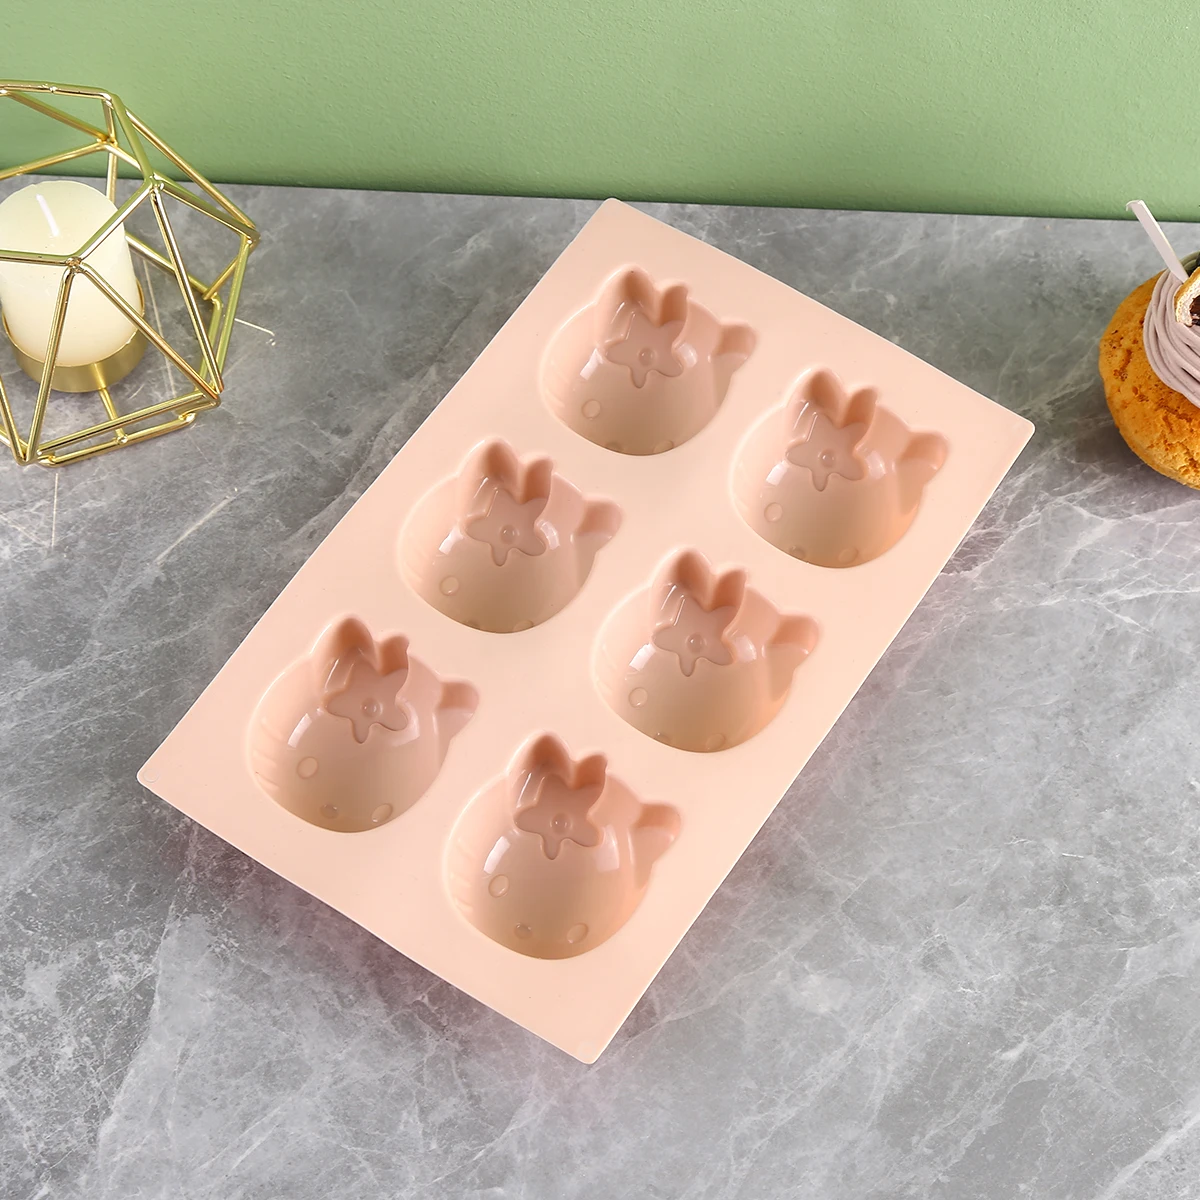 High Quality 6 Cavity Silicone Cake Mold Pink Blue Grey 3 colors Food Grade BPA Free Cake Design Making Tools Kitty Cat Mold